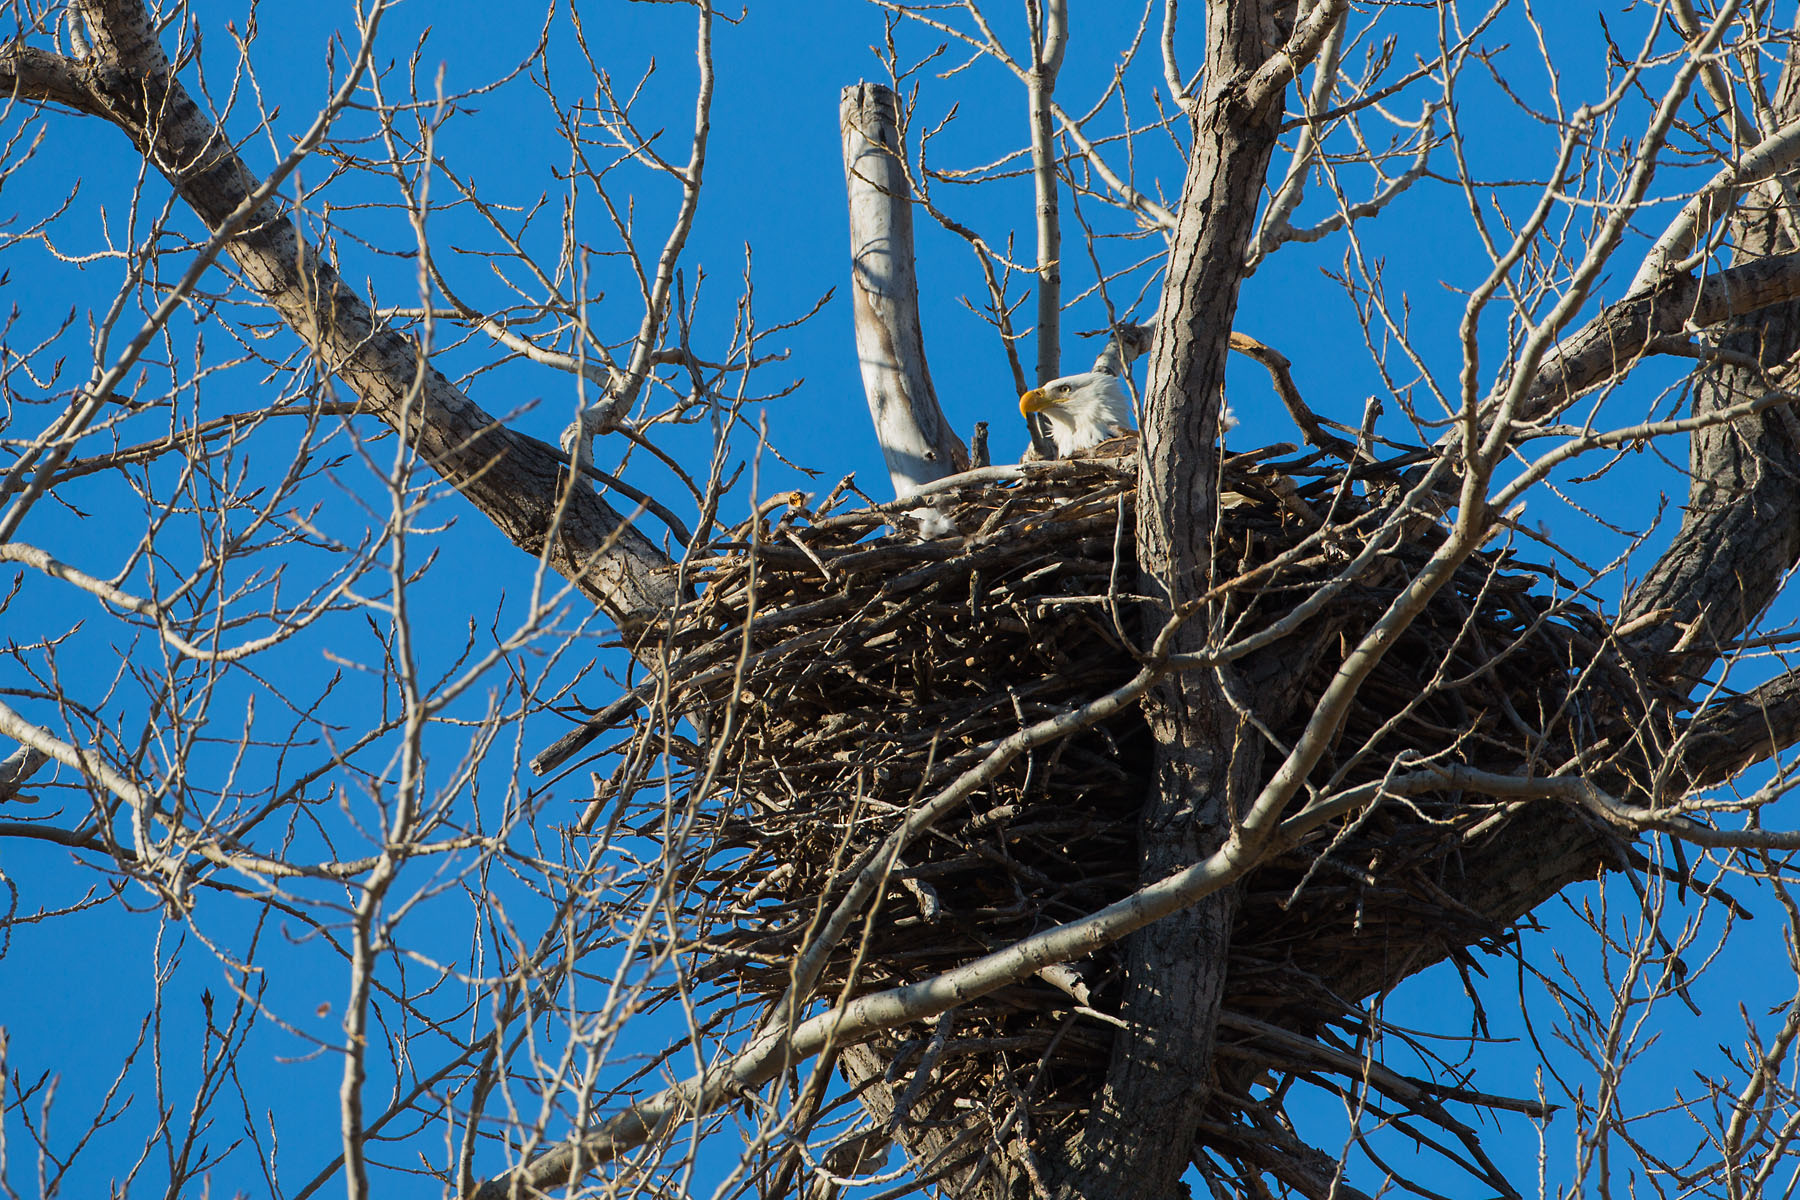 Bald Eagle in nest, Loess Bluffs NWR, December 2019.  Click for next photo.